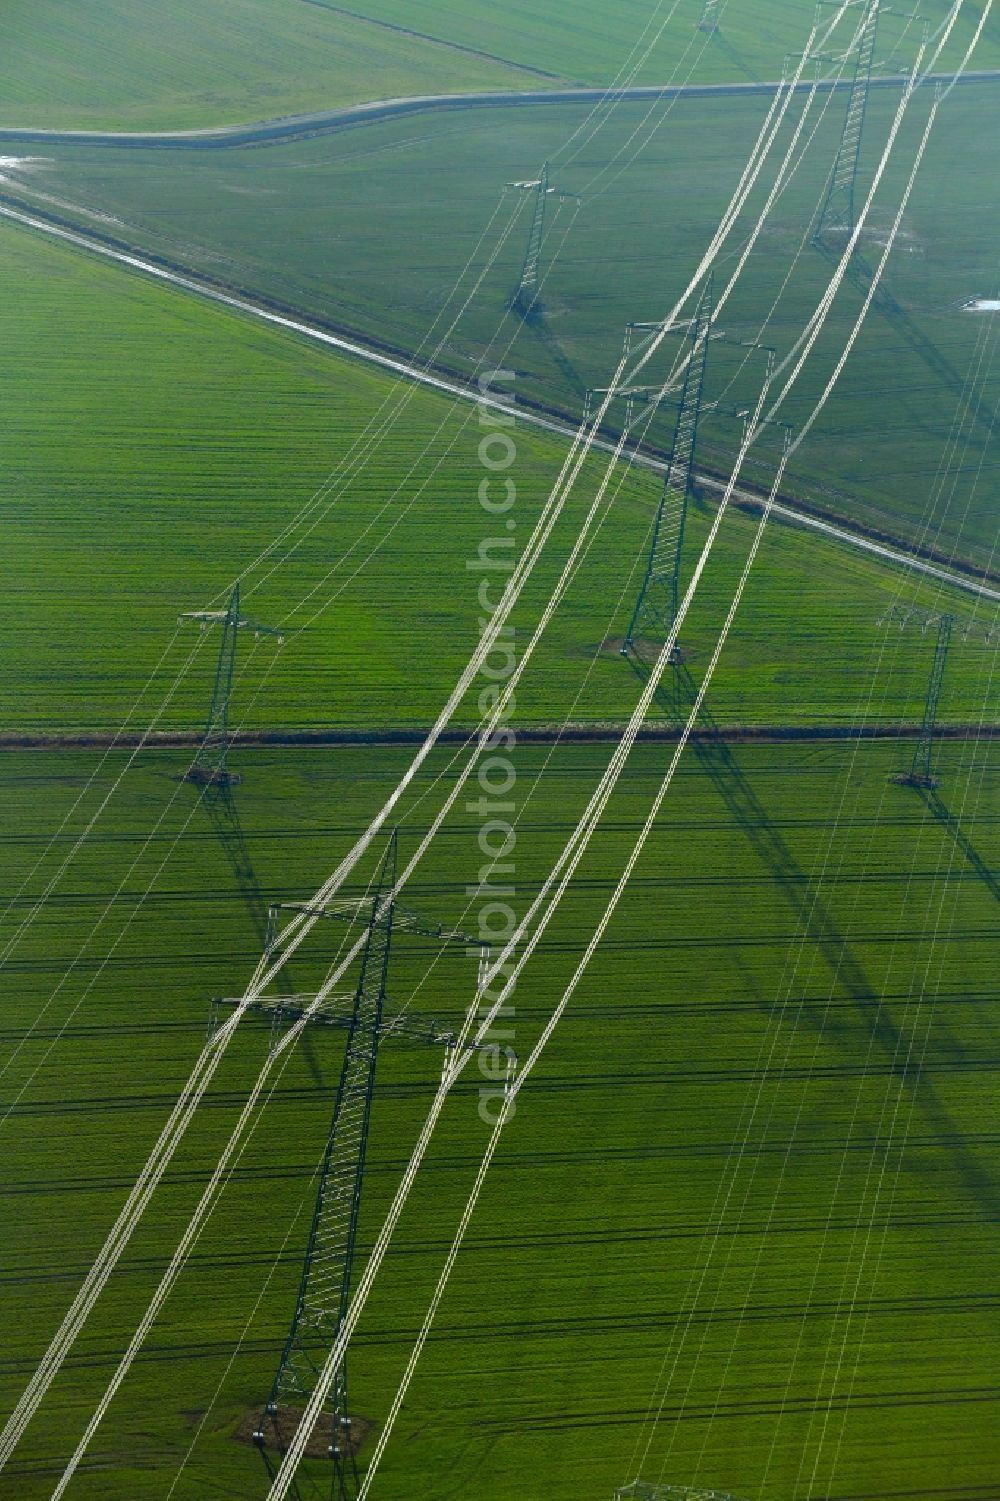 Wansdorf from above - Current route of the power lines and pylons in Wansdorf in the state Brandenburg, Germany